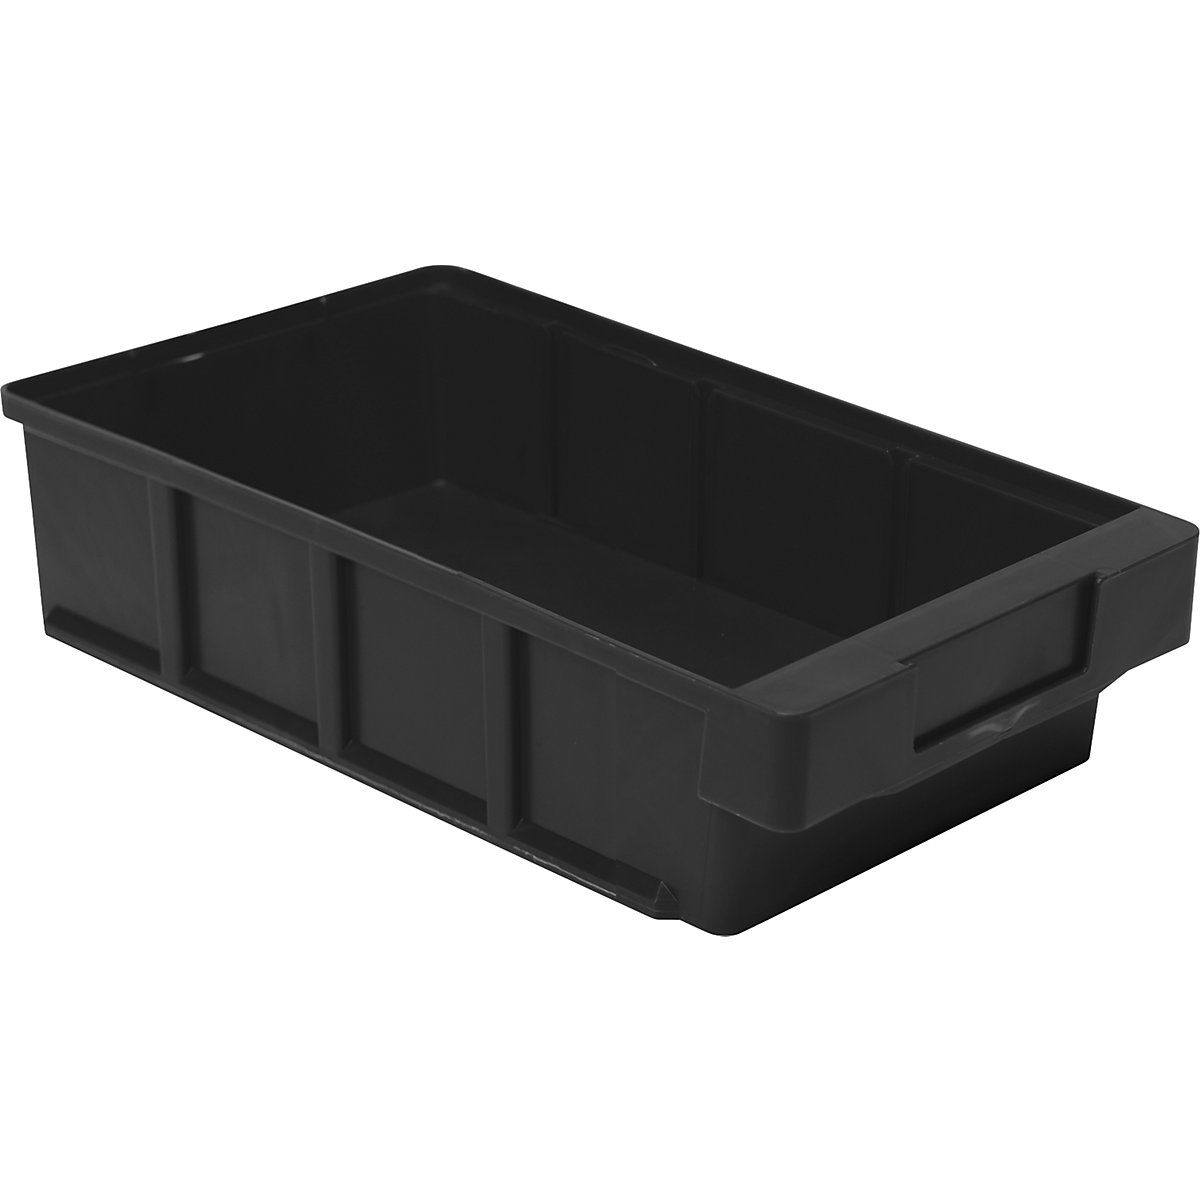 ESD small parts box, made of polypropylene, LxWxH 600 x 186 x 83 mm, pack of 8-6